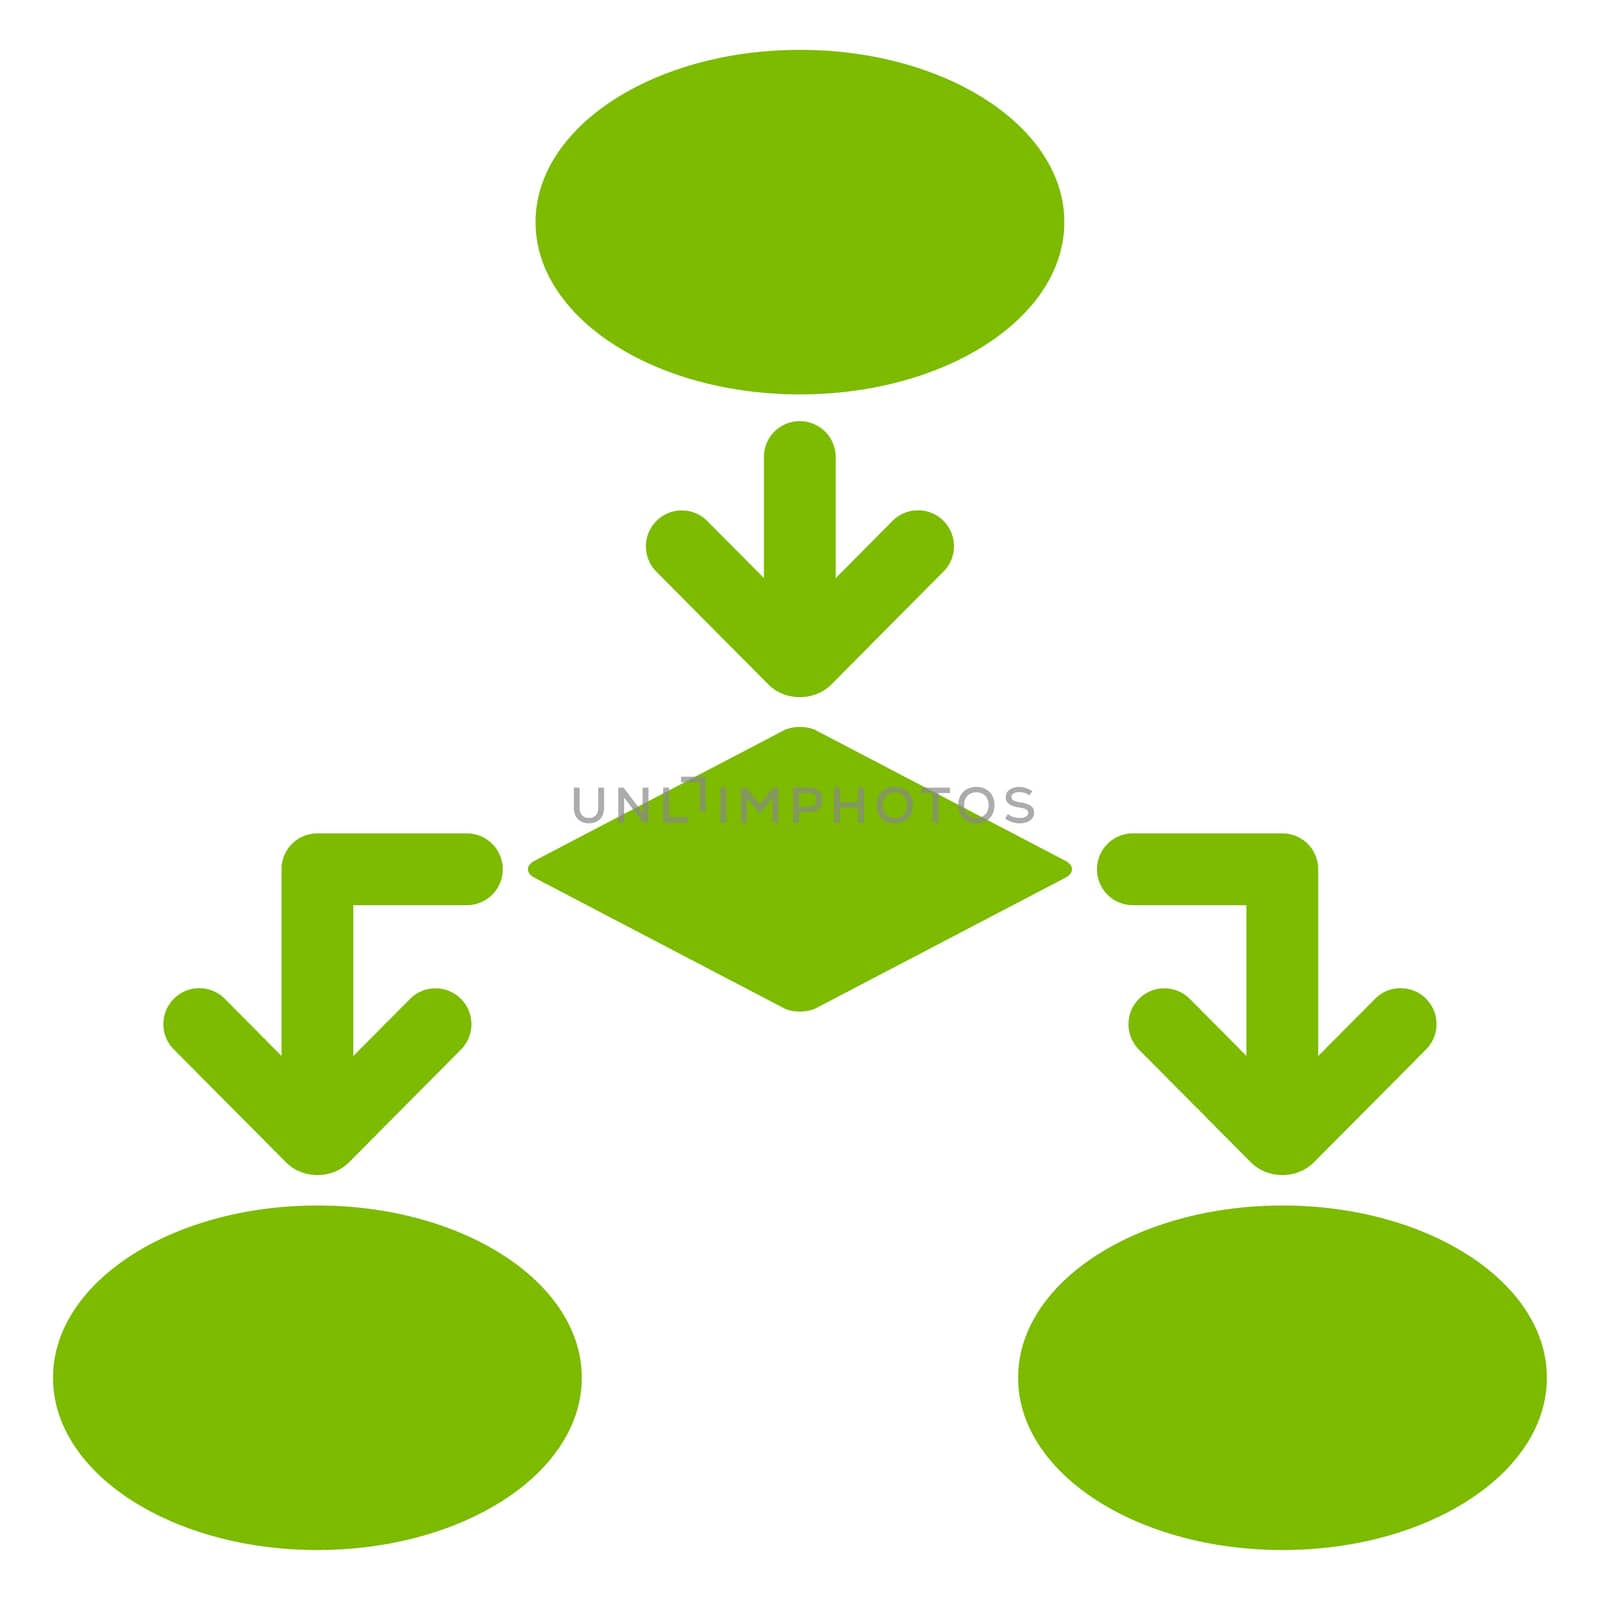 Flowchart icon from Commerce Set. Glyph style: flat symbol, eco green color, rounded angles, white background.